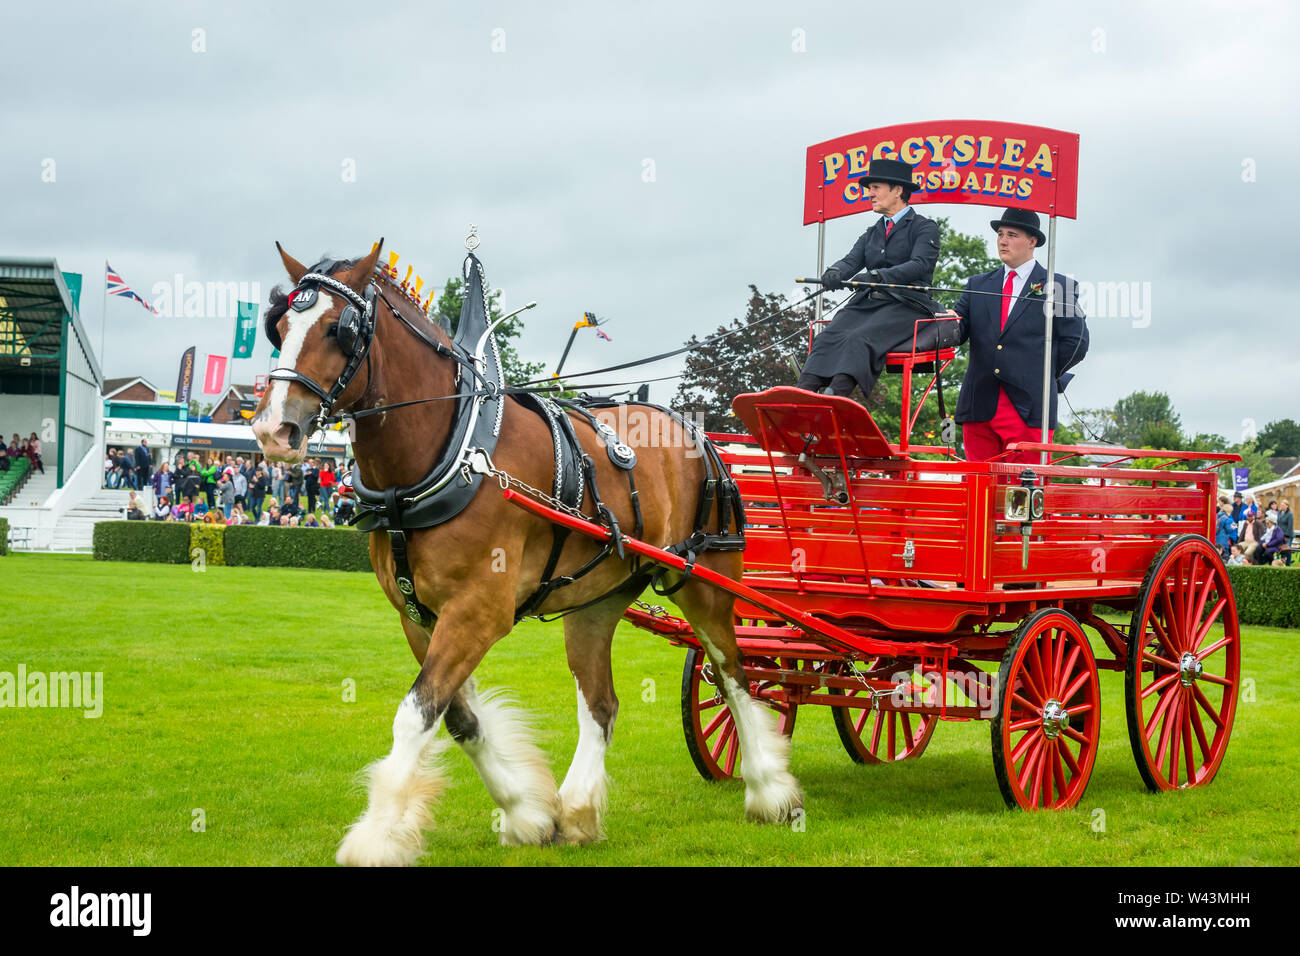 The Great Yorkshire Show, 2019, held in Harrogate, UK. Heavy horse parade with magnificent Clydesdale pulling Brewery Cart.  Landscape. Stock Photo